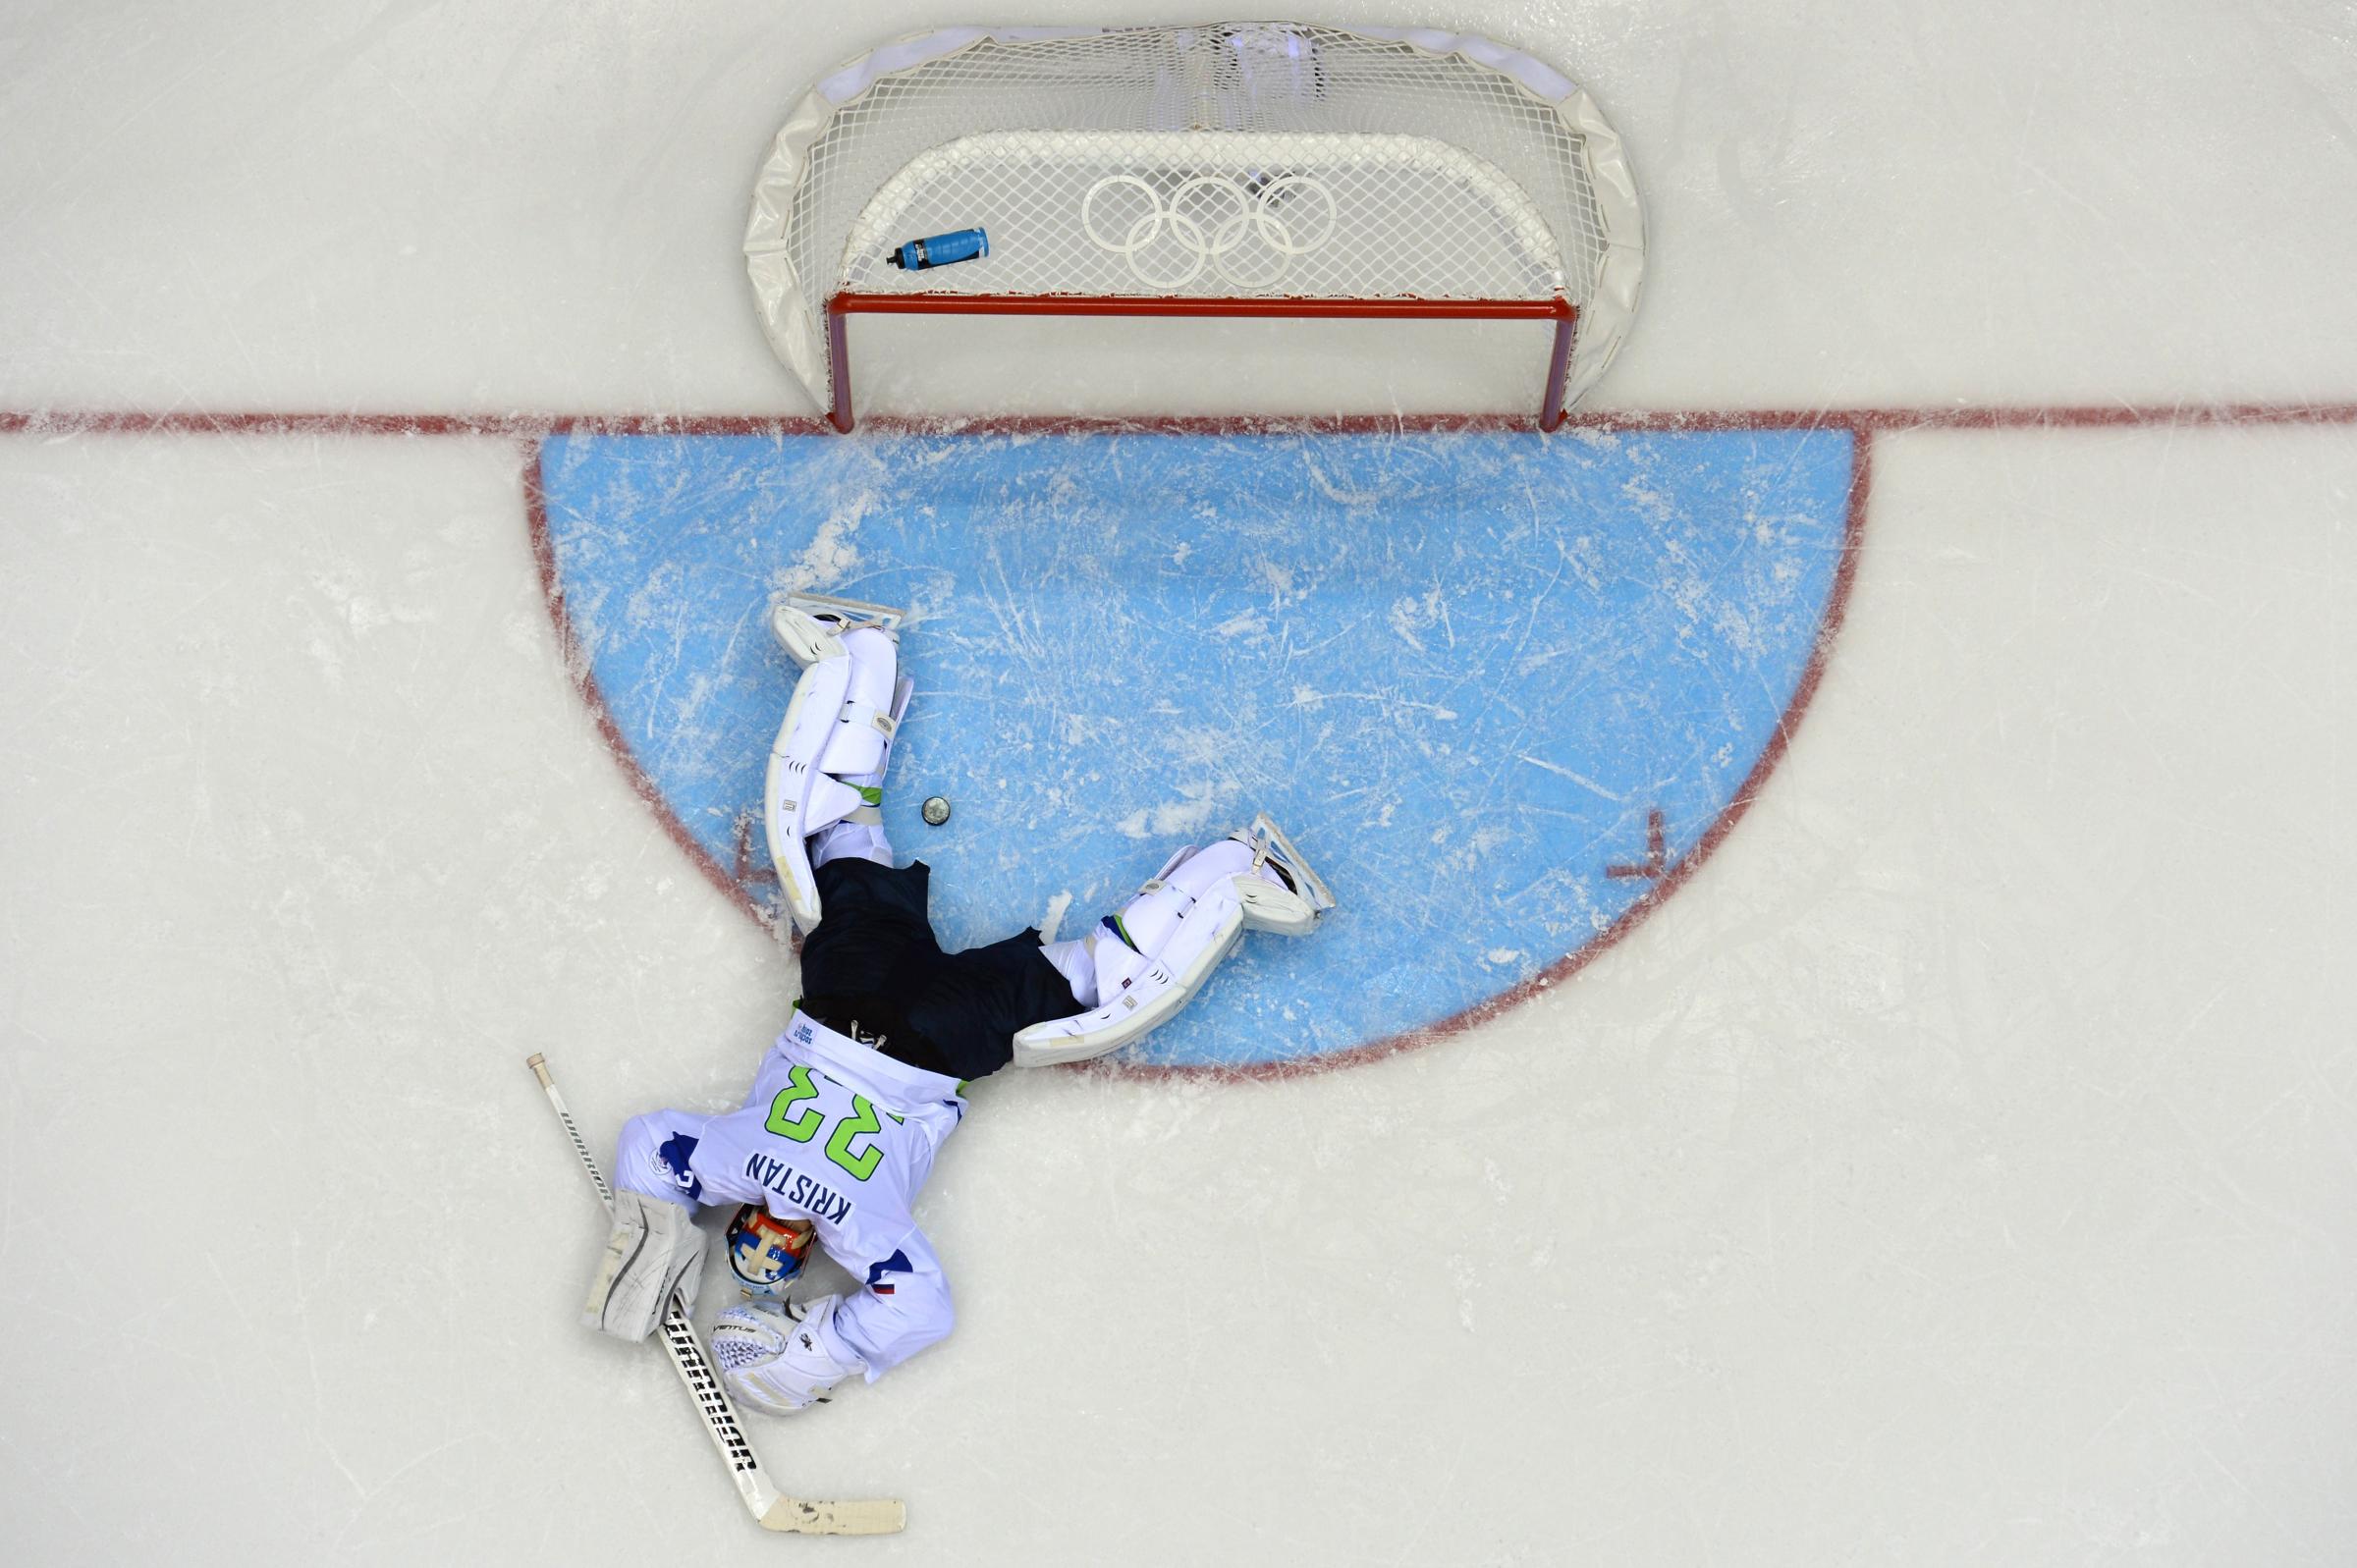 Slovenia's goalkeeper Robert Kristan reacts after Russia scored a fifth goal during the Men's Ice Hockey Group A match between Russia and Slovenia.